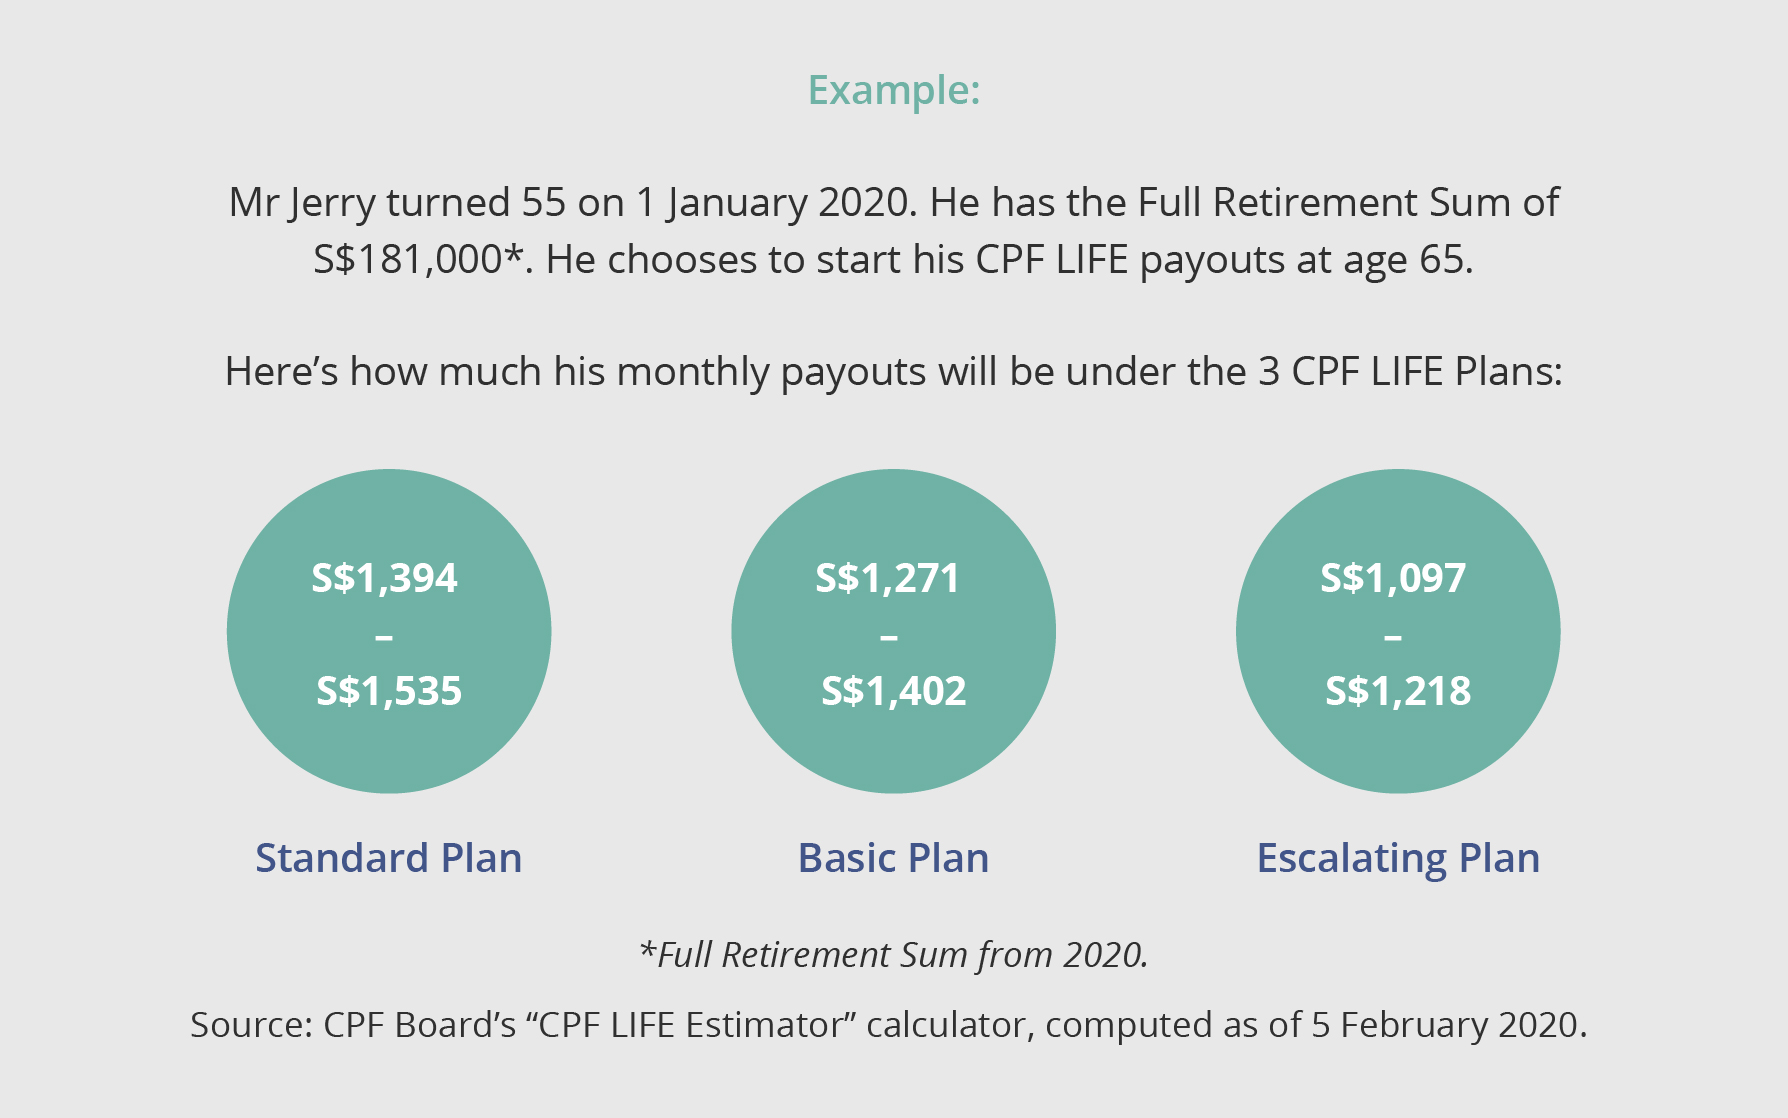 Get SeRiouS about retirement planning